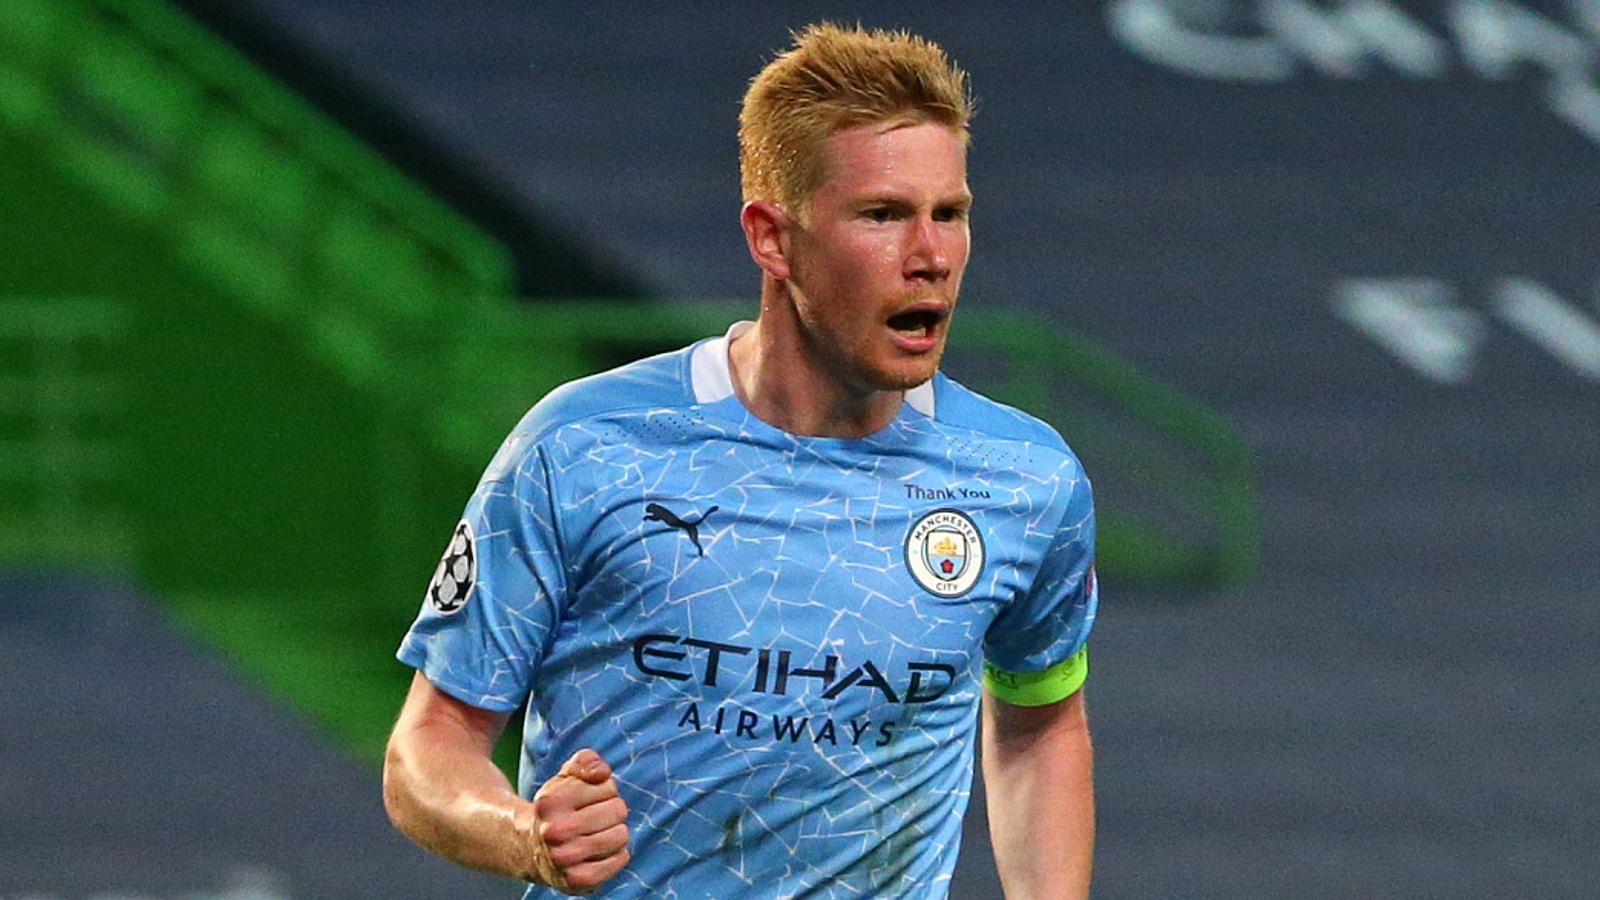 Kevin De Bruyne got the opening goal for Manchester City